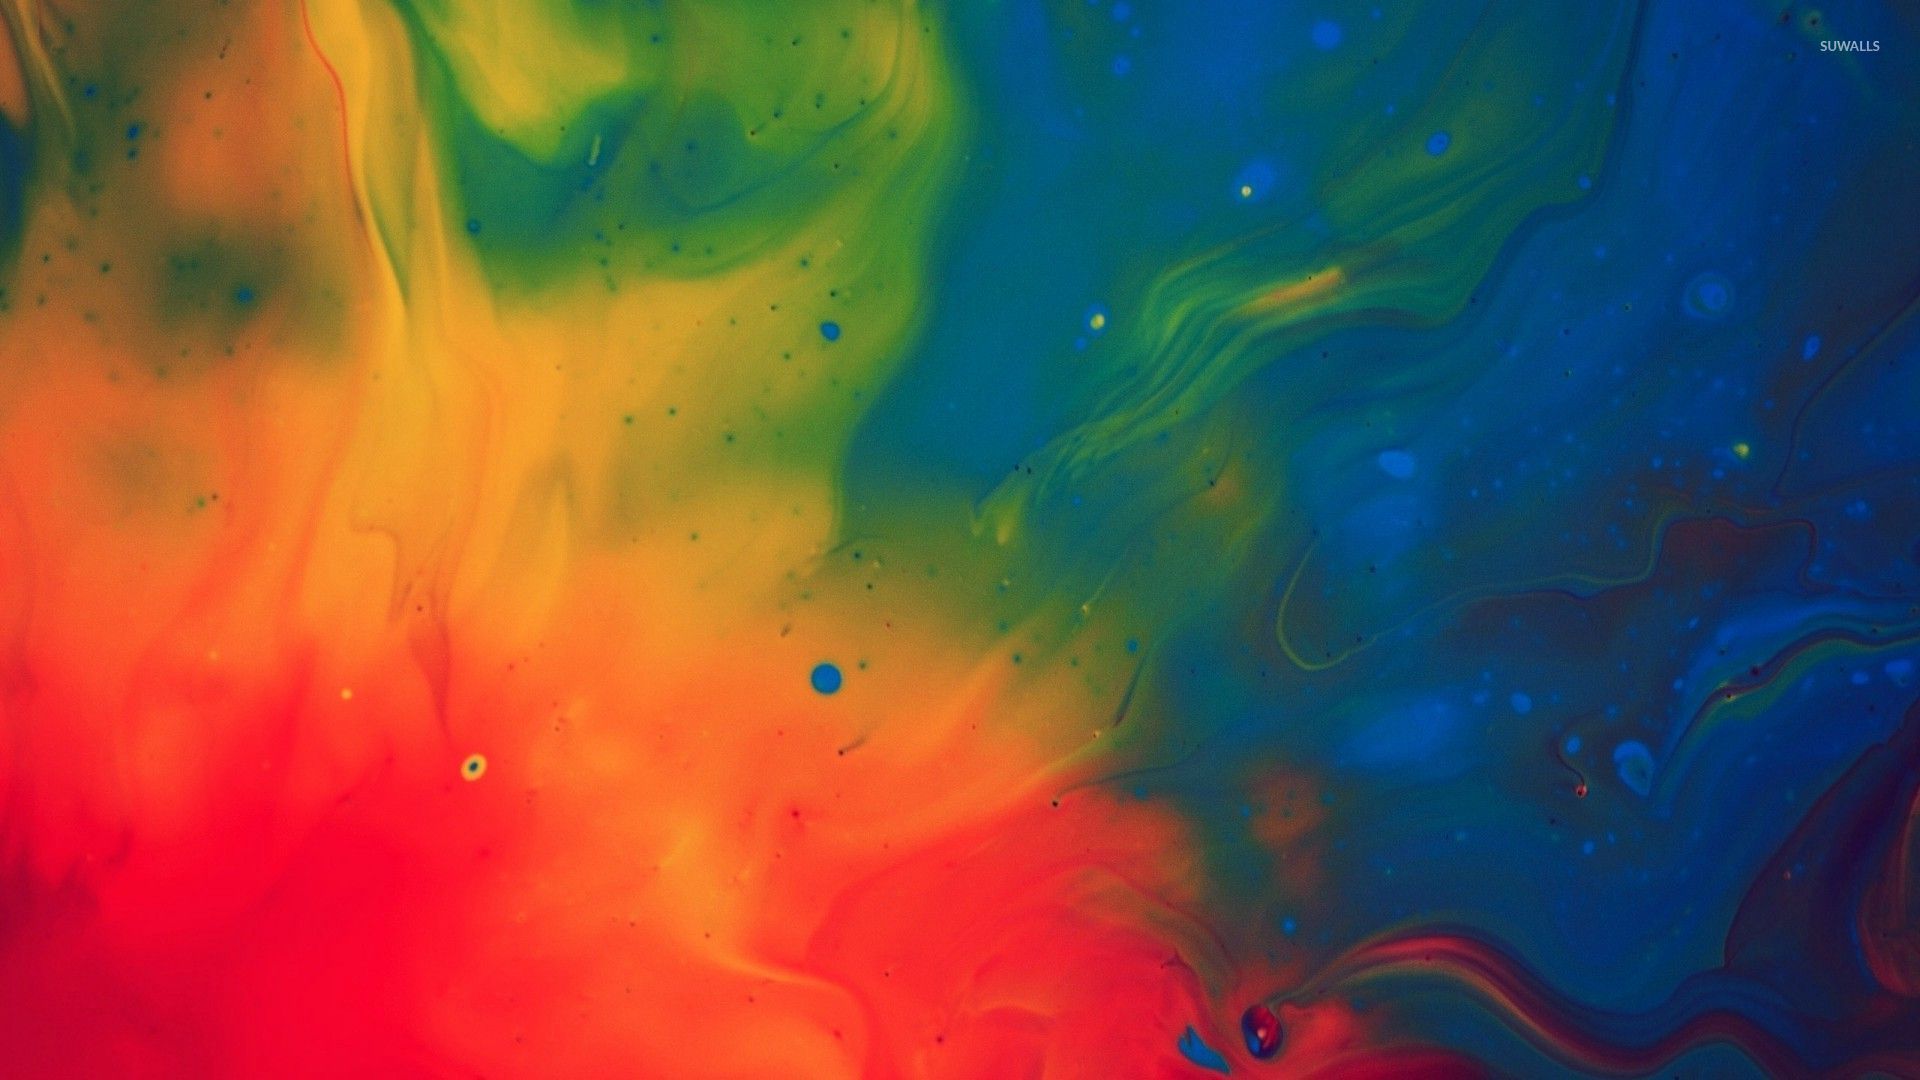 Paint in oil wallpaper - Abstract wallpapers - #27498